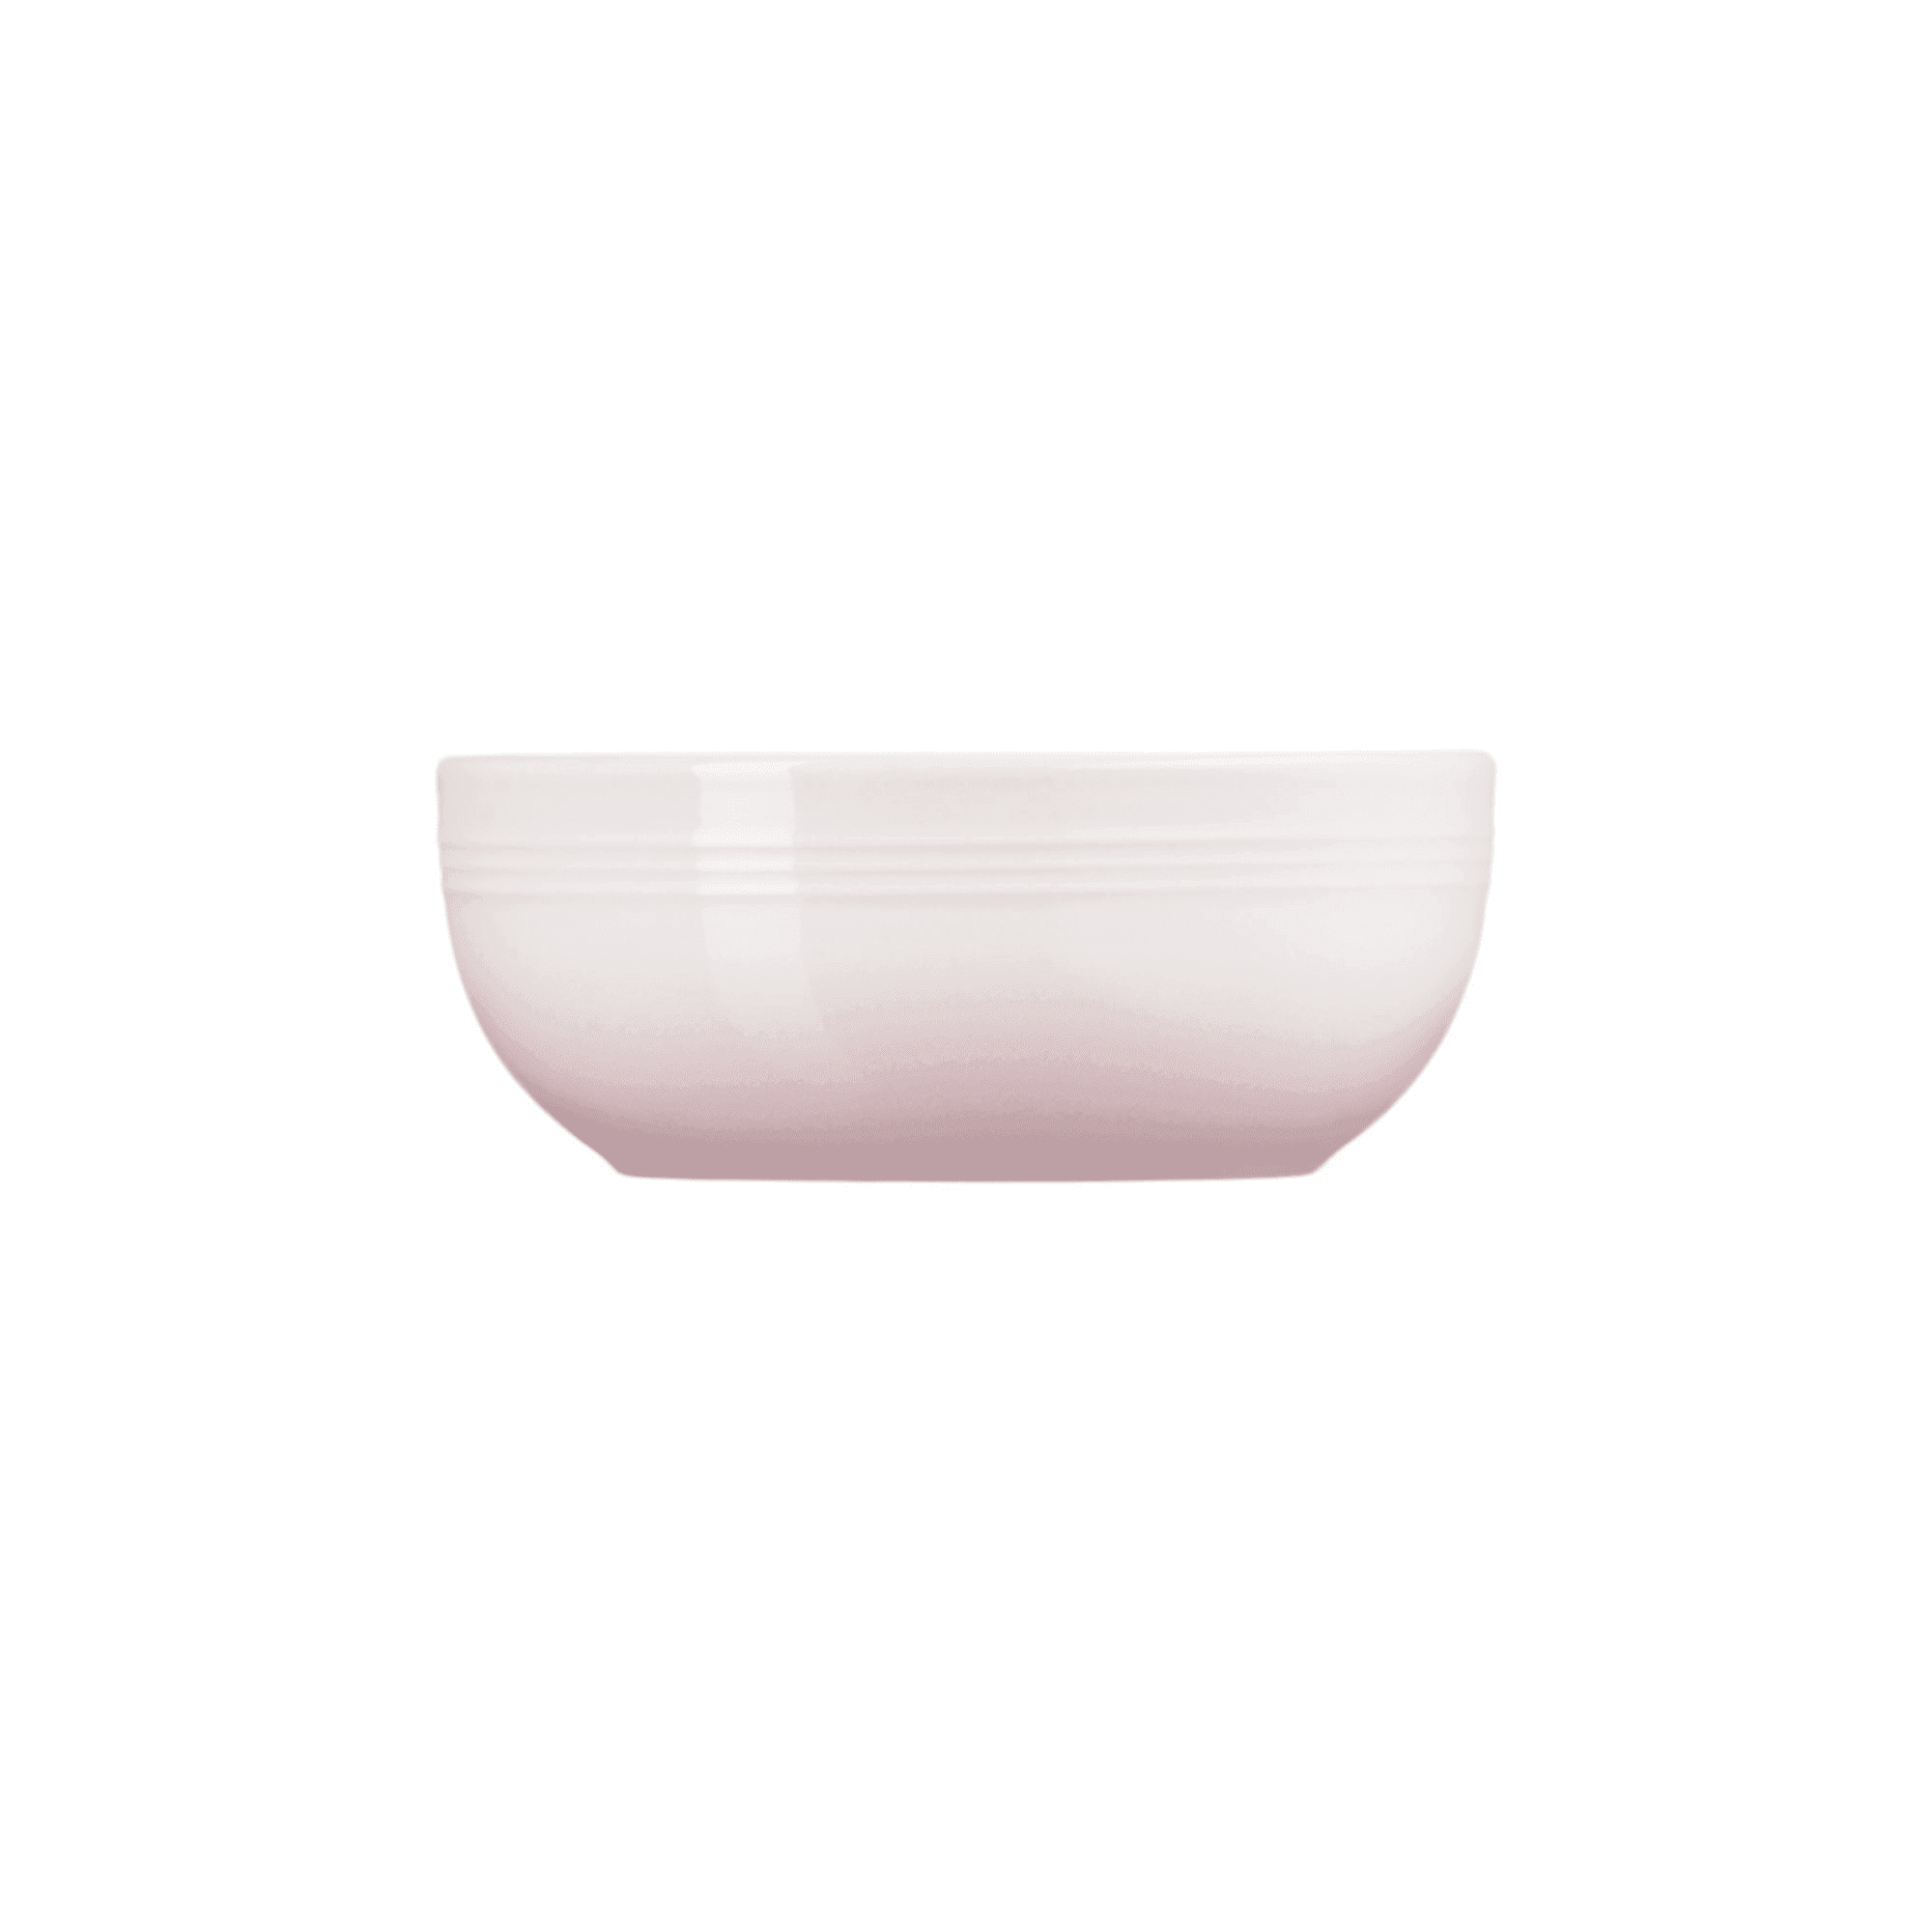 Le Creuset Stoneware Coupe Cereal Bowl 16cm Shell Pink Image 9